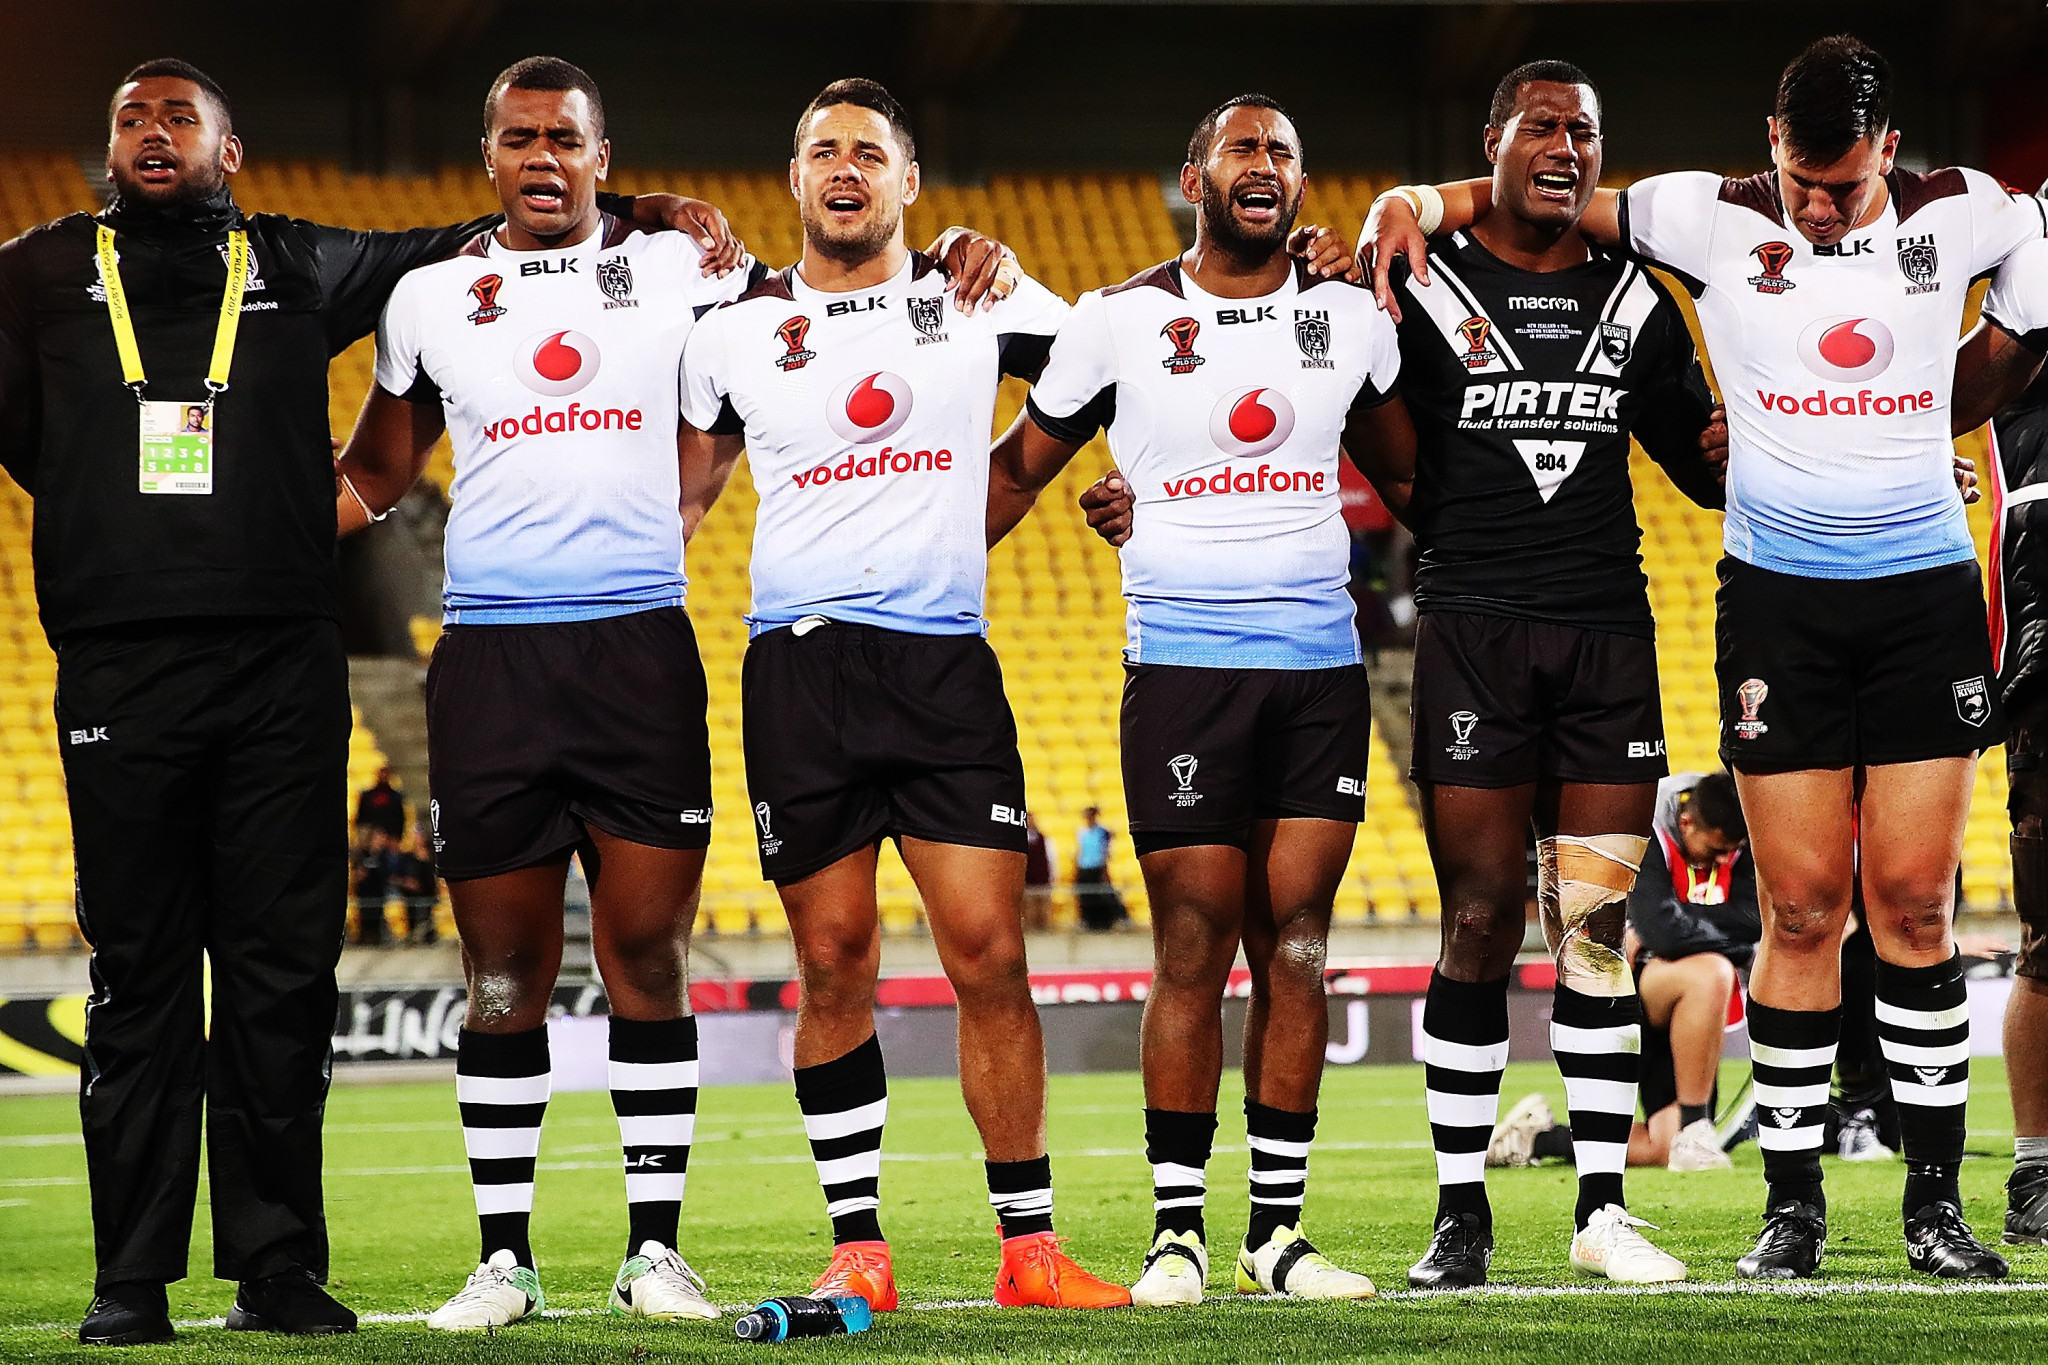 Fiji shock New Zealand to earn place in Rugby League World Cup semi-finals